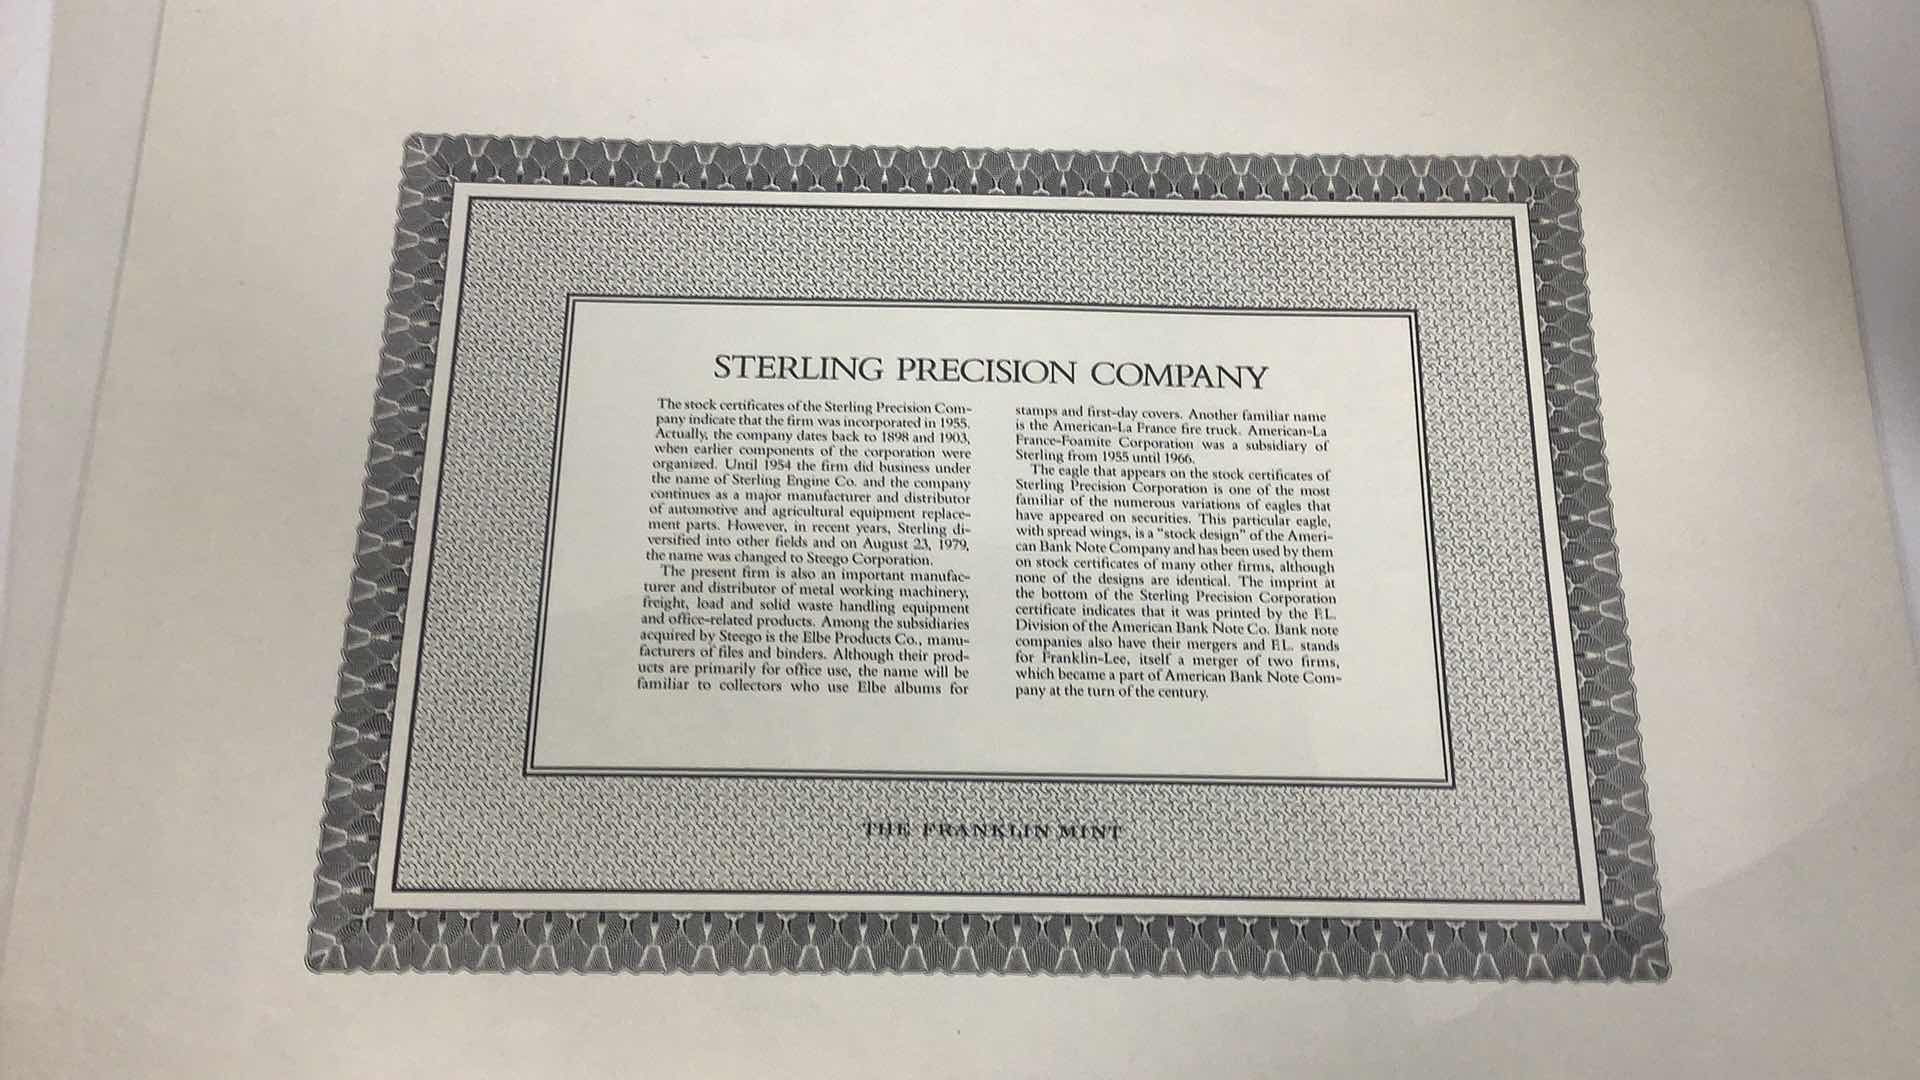 Photo 4 of FRANKLIN MINT, UNITED STATES LINES AND STERLING PRECISION CORPORATION 100 SHARES